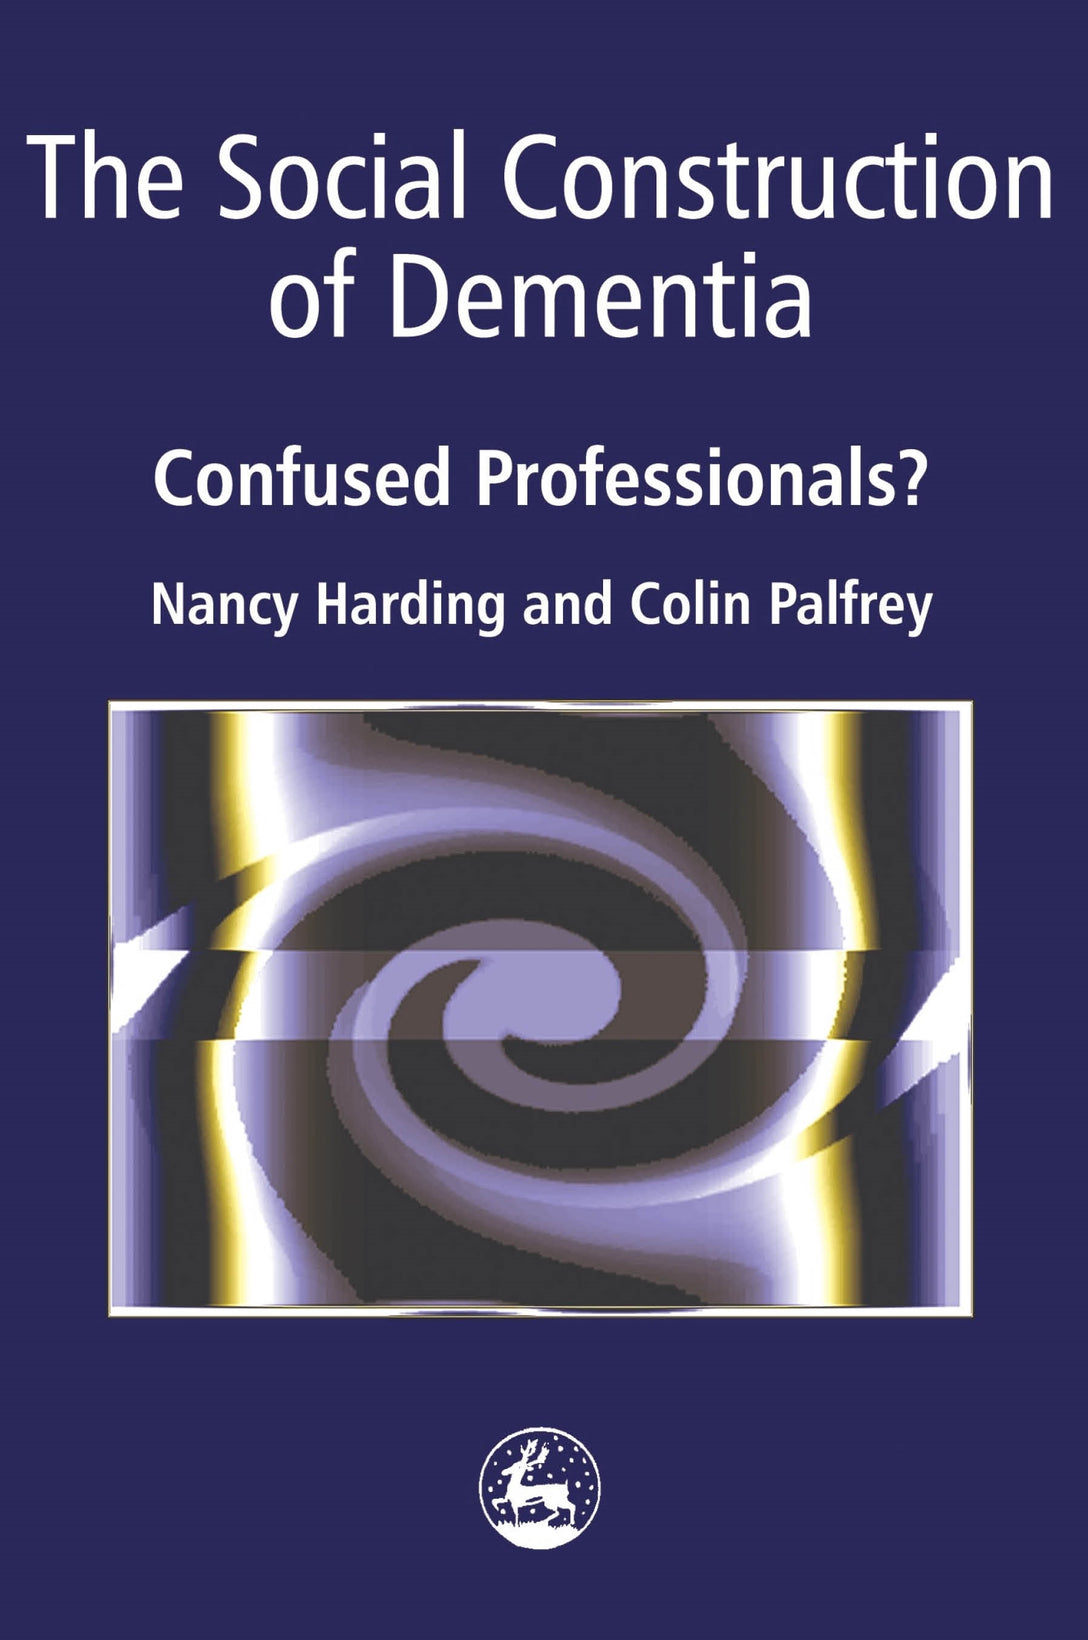 The Social Construction of Dementia by Nancy Harding, Colin Palfrey